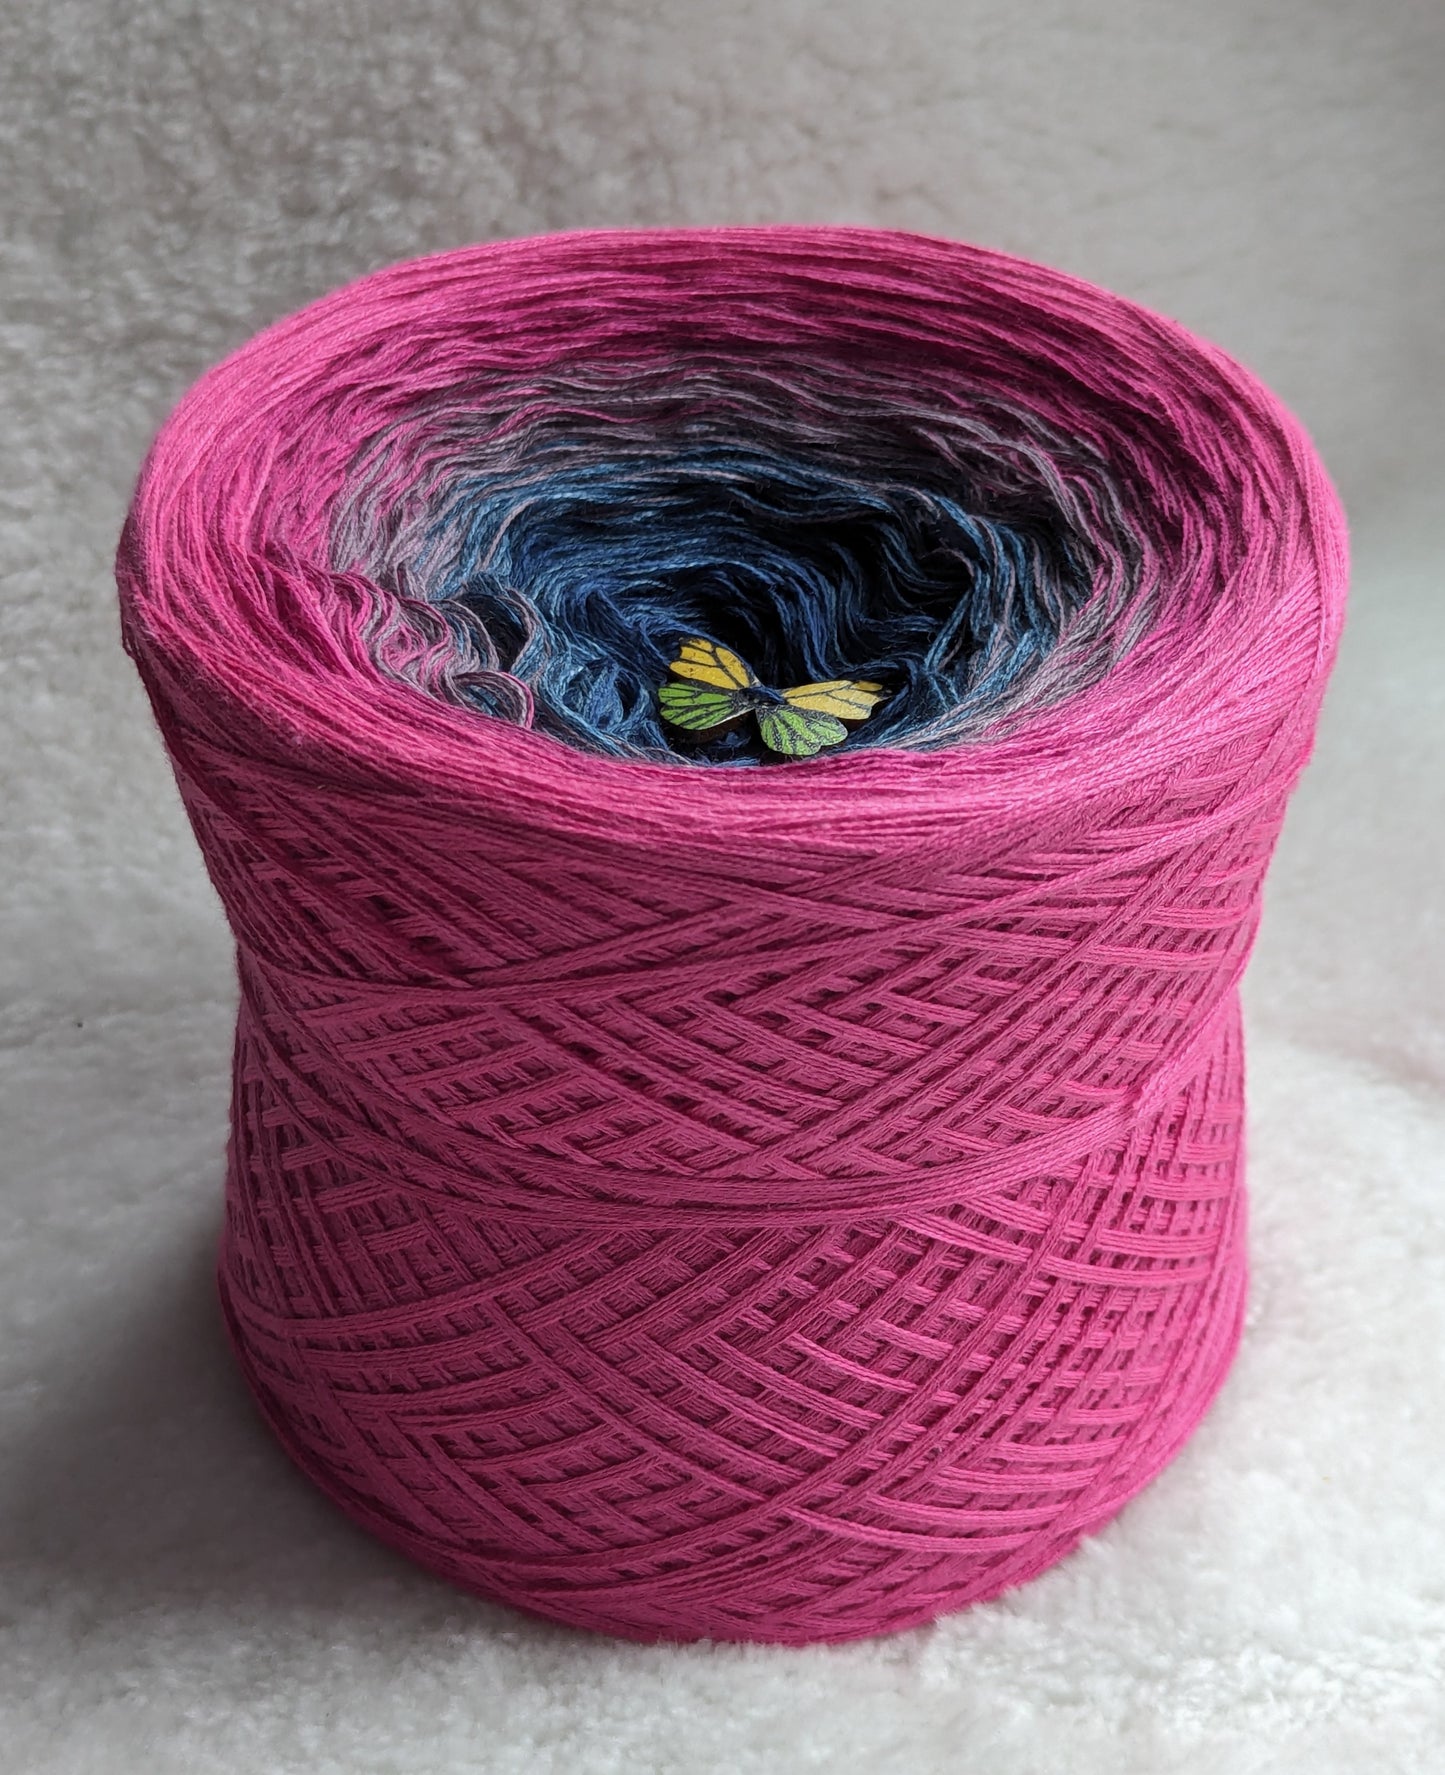 "Cosmos Flowers" cotton/acrylic ombre yarn cake, 335g, about 1250m, 4ply, smoothie style